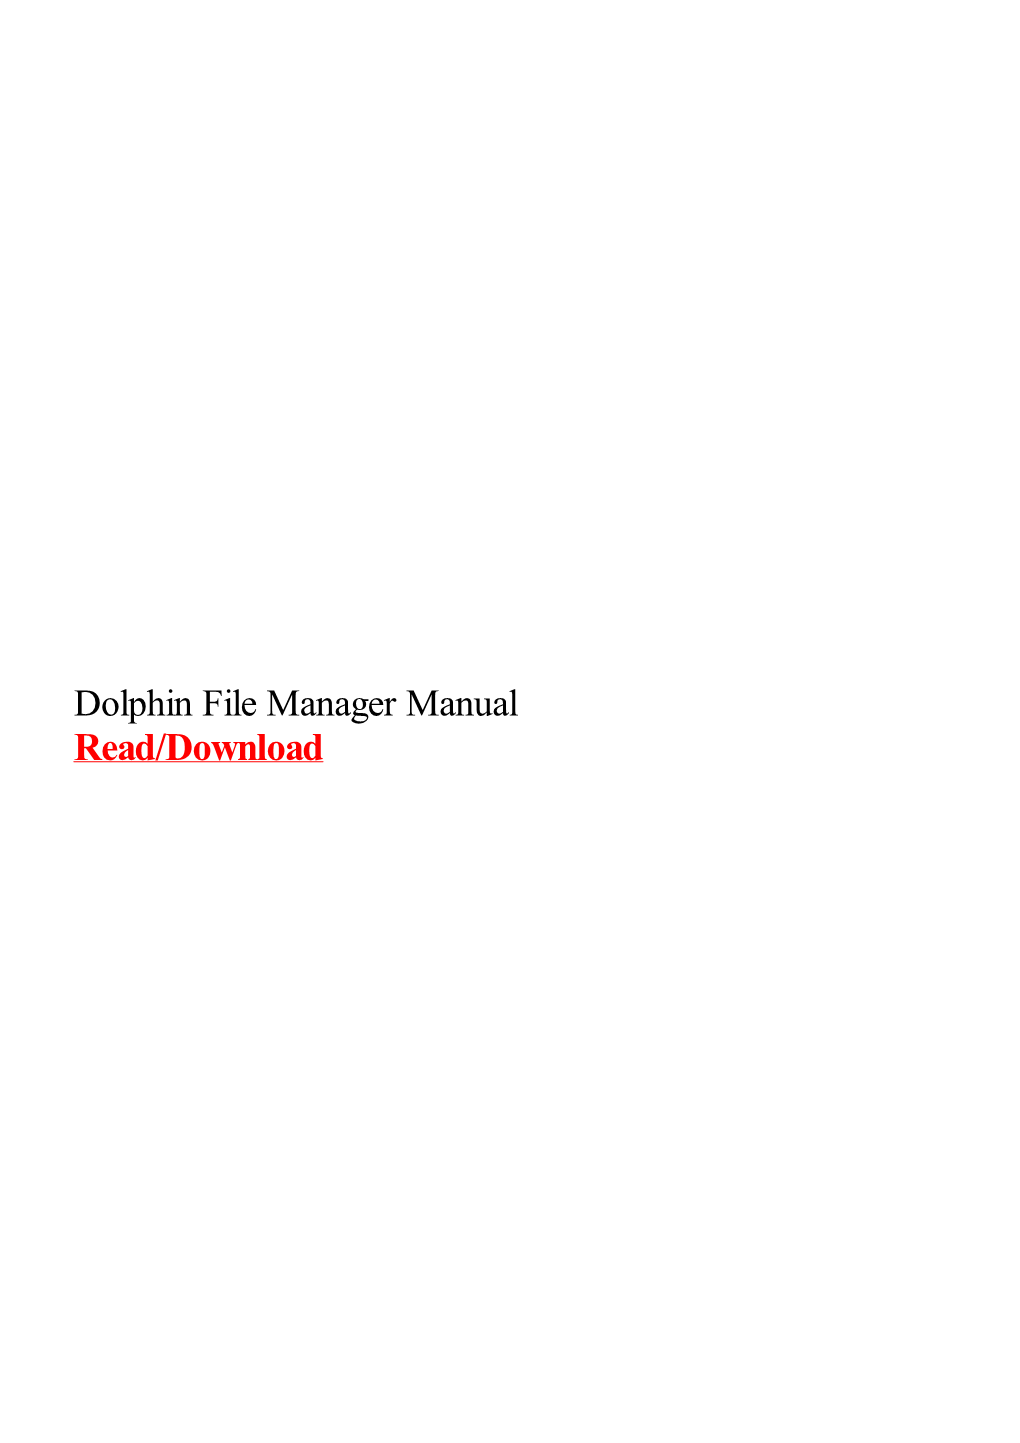 Dolphin File Manager Manual Owncloud User Manual